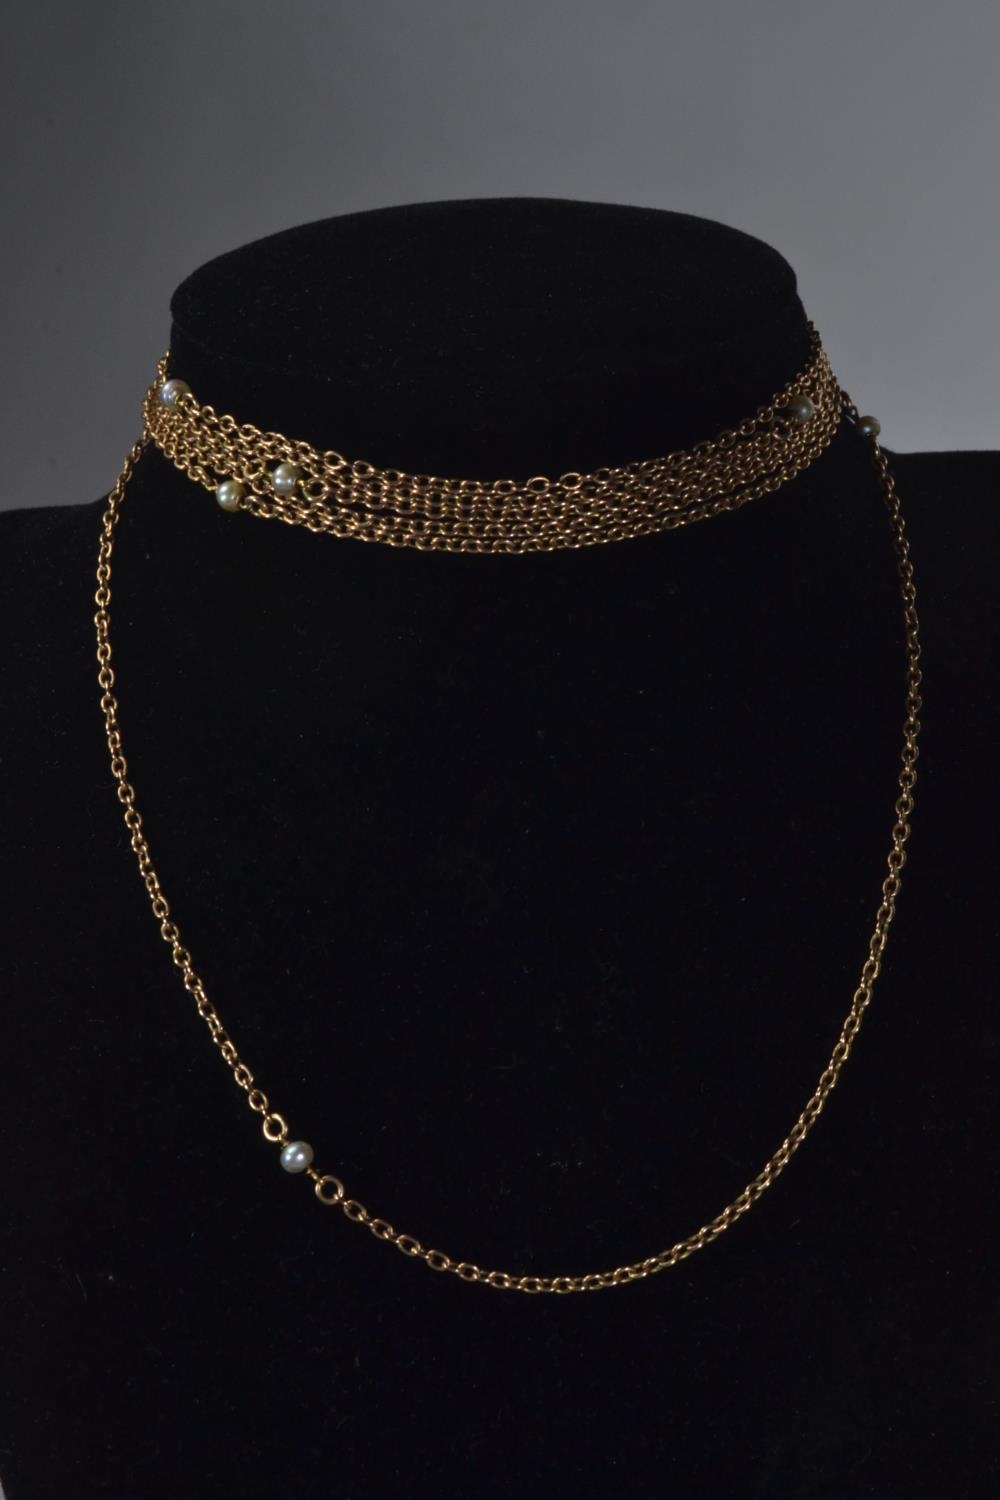 15ct rose gold & seed pearl long chain, circumference 1560mm, gross weight 16.69 grams  - Image 2 of 4